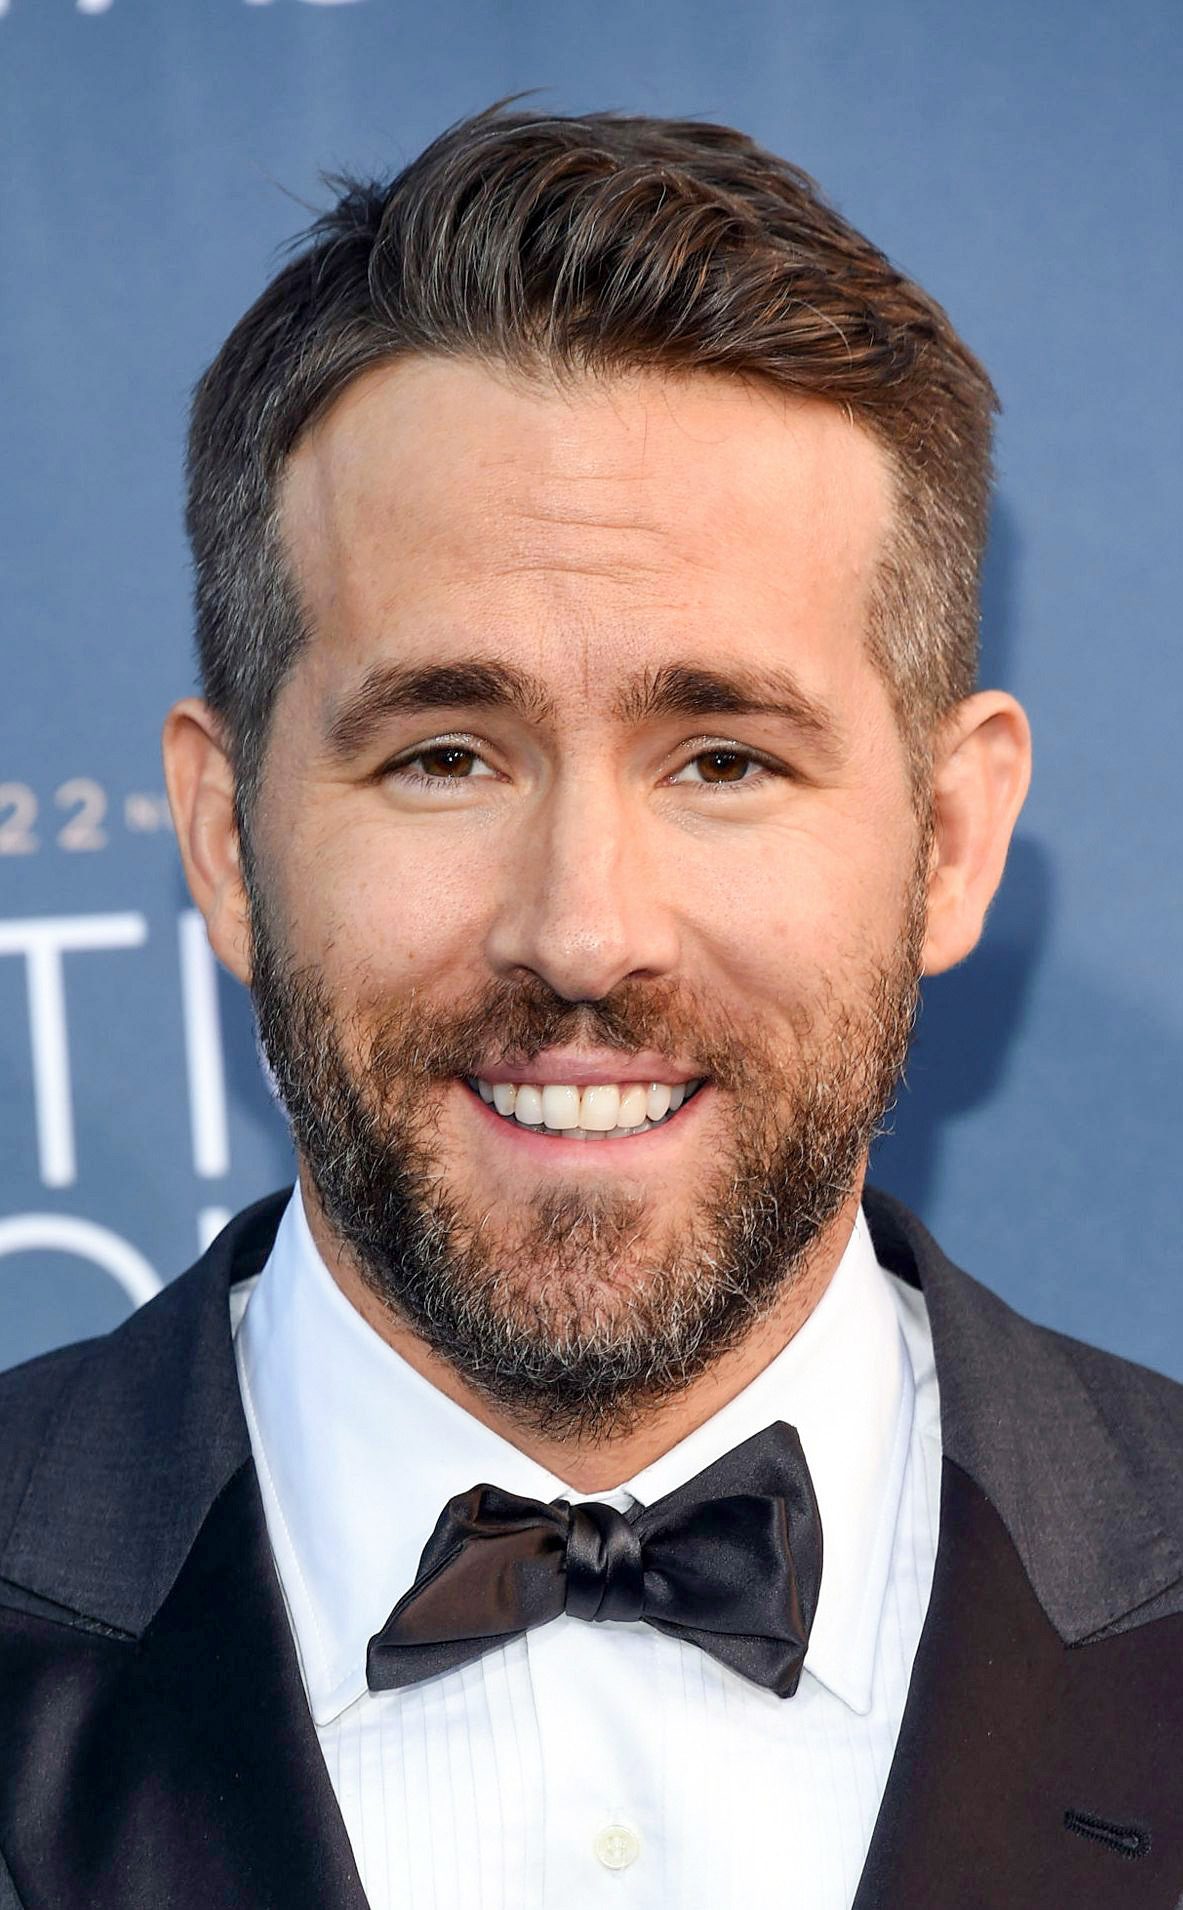 Ryan Reynolds classic regular taper with side part